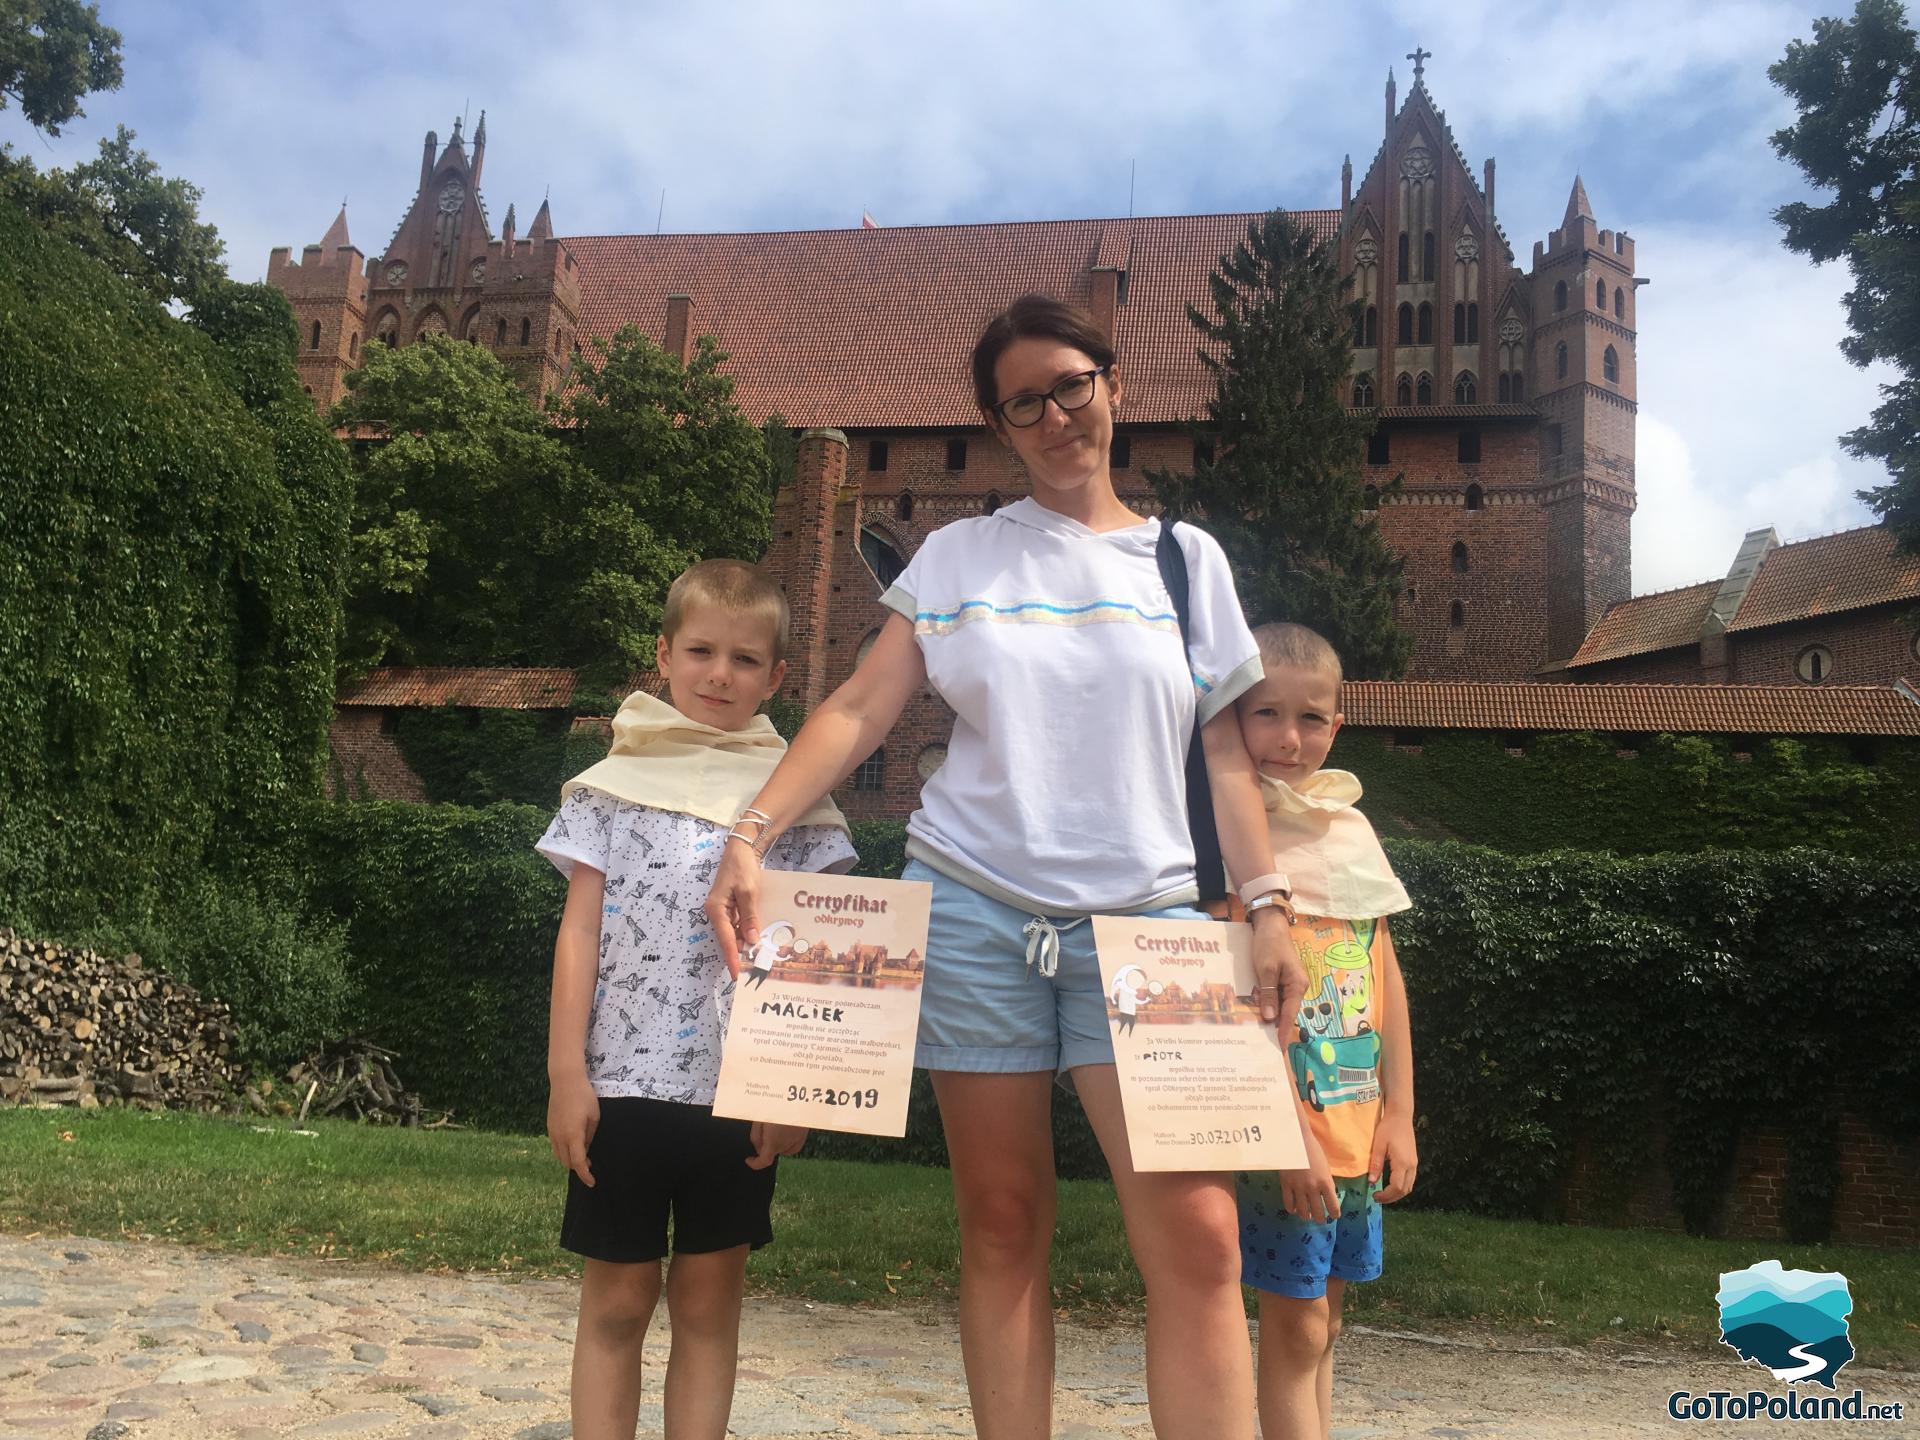 a woman and two boys are in front of a castle, a woman is holding some certificates